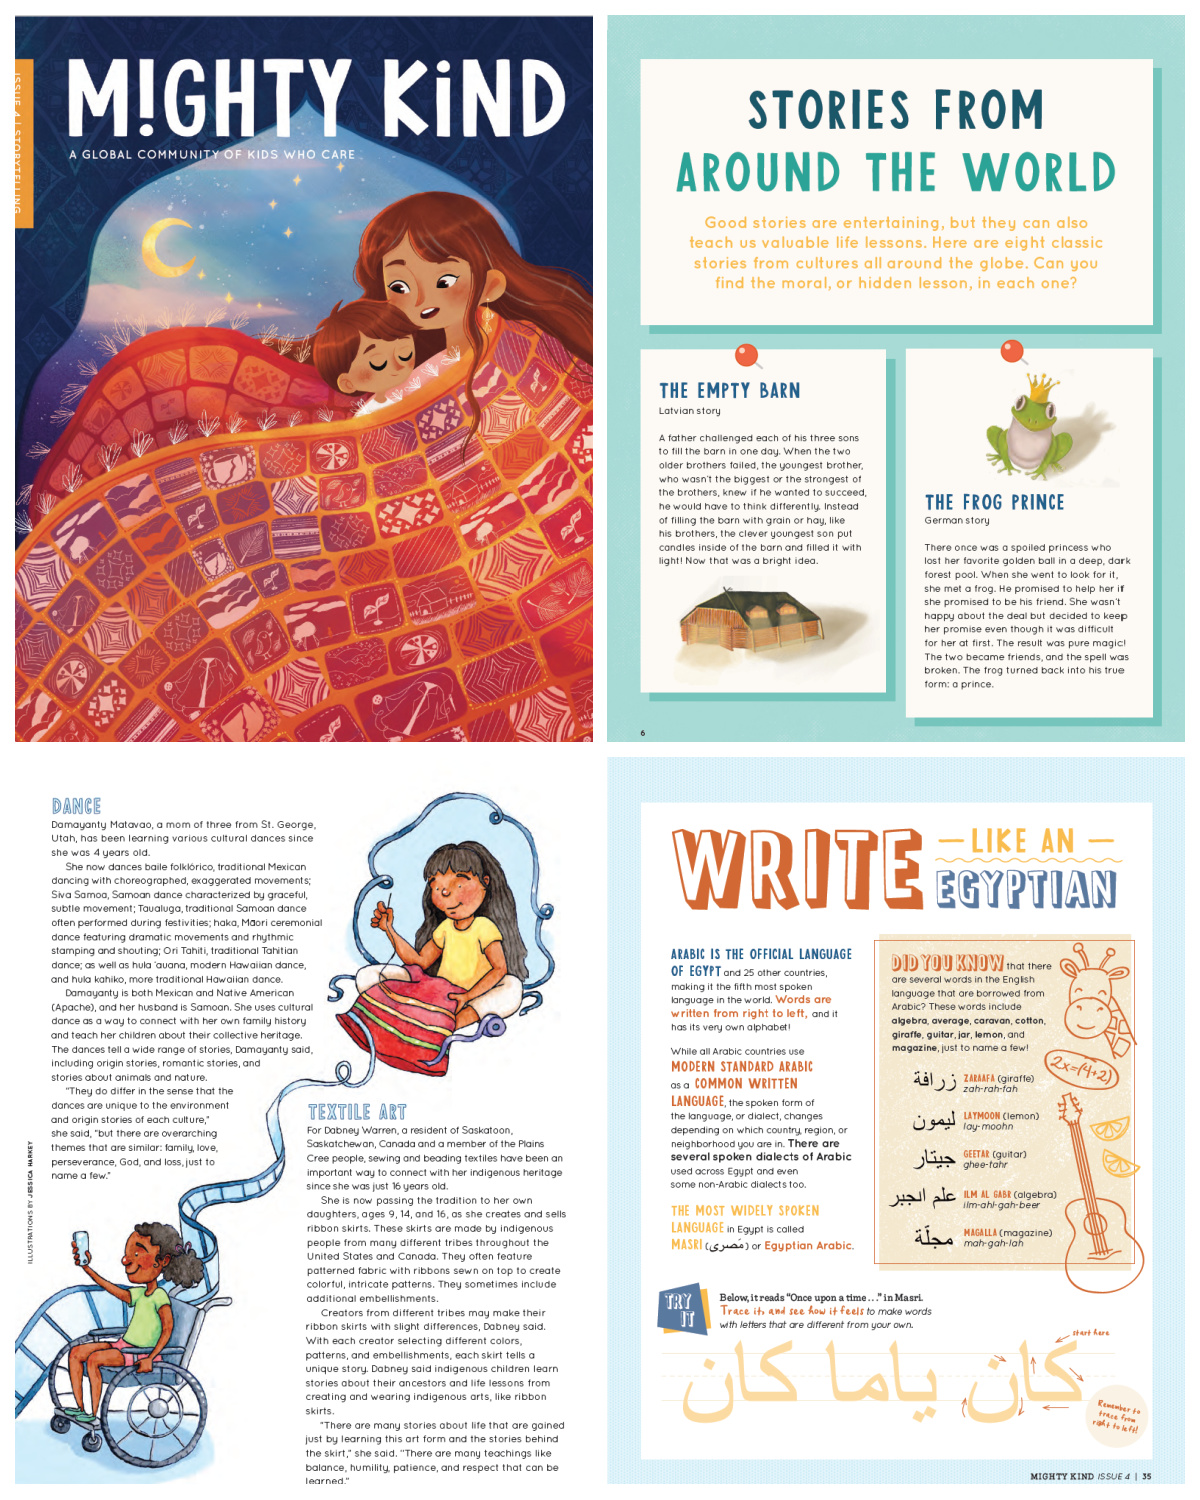 Anti-racism resources for kids: The storytelling issue of Mighty Kind magazine helps kids see life from another's perspective.